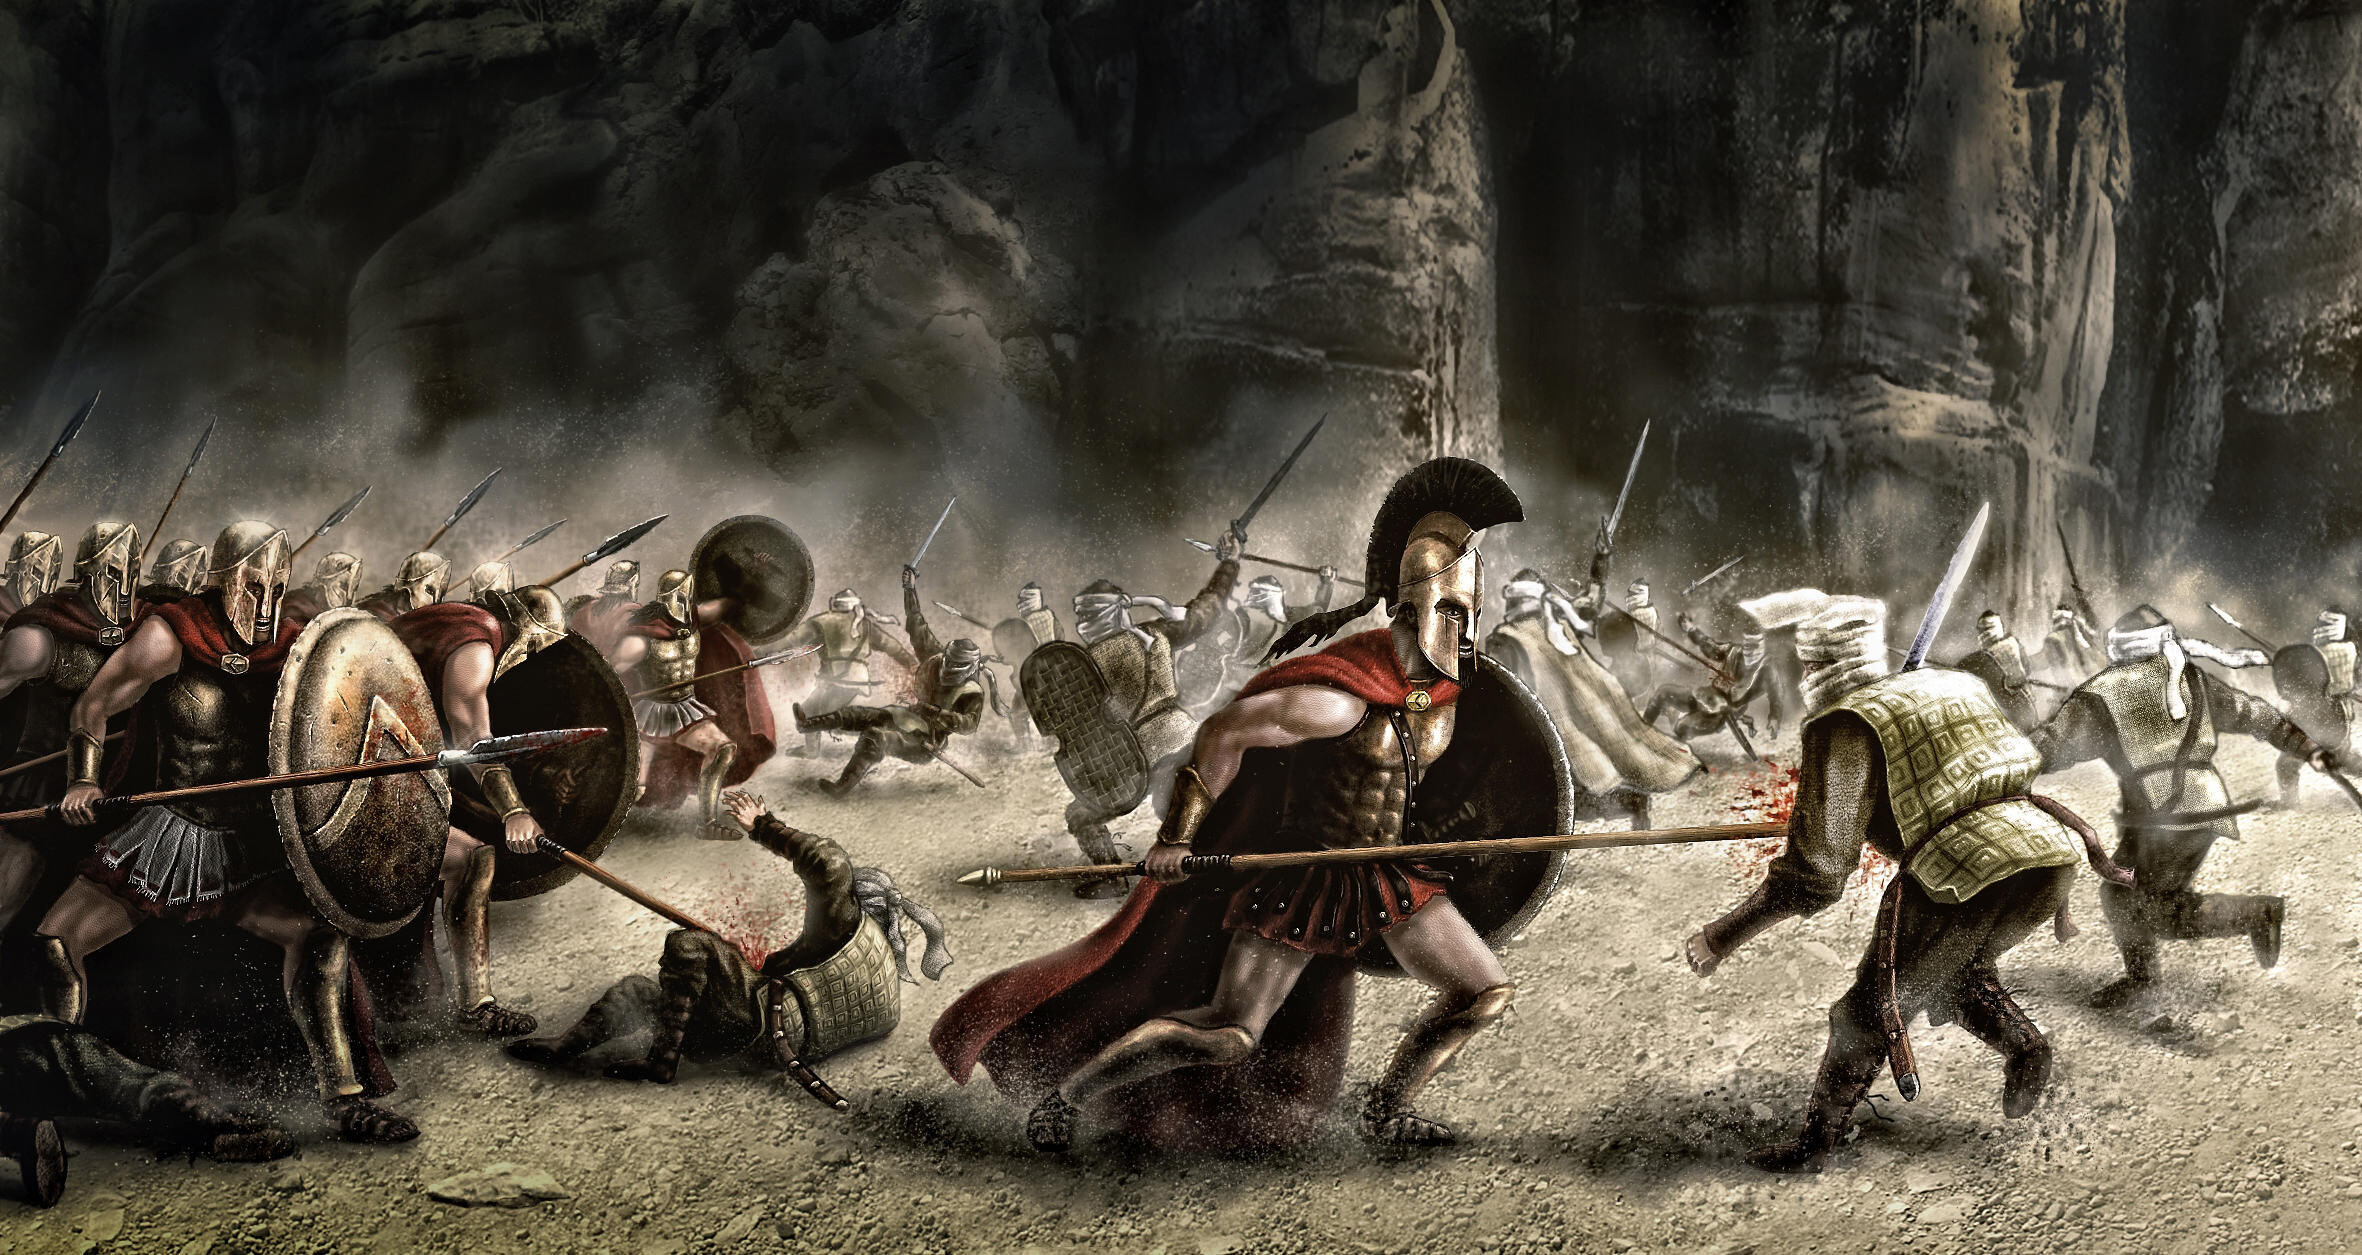 Sparta: The Battle of Thermopylae art, Achaemenid Persian Empire under Xerxes I vs. an alliance of Greek city-states led by Spartan King Leonidas I. 2370x1260 HD Wallpaper.